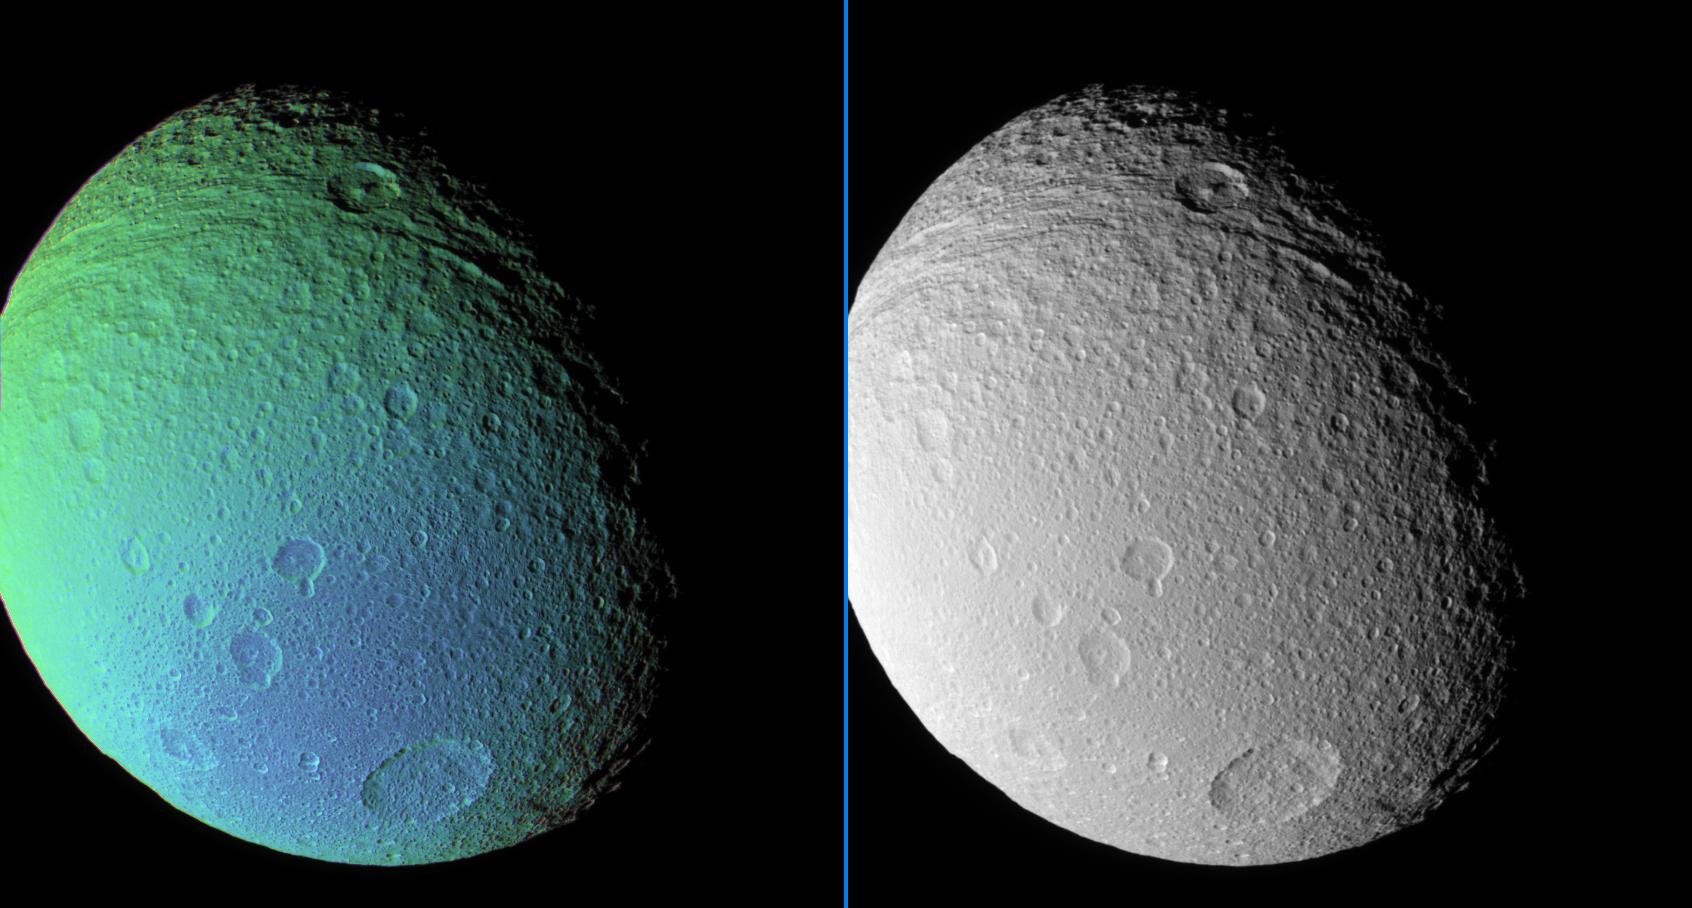 Tethys in false-color and monochrome view